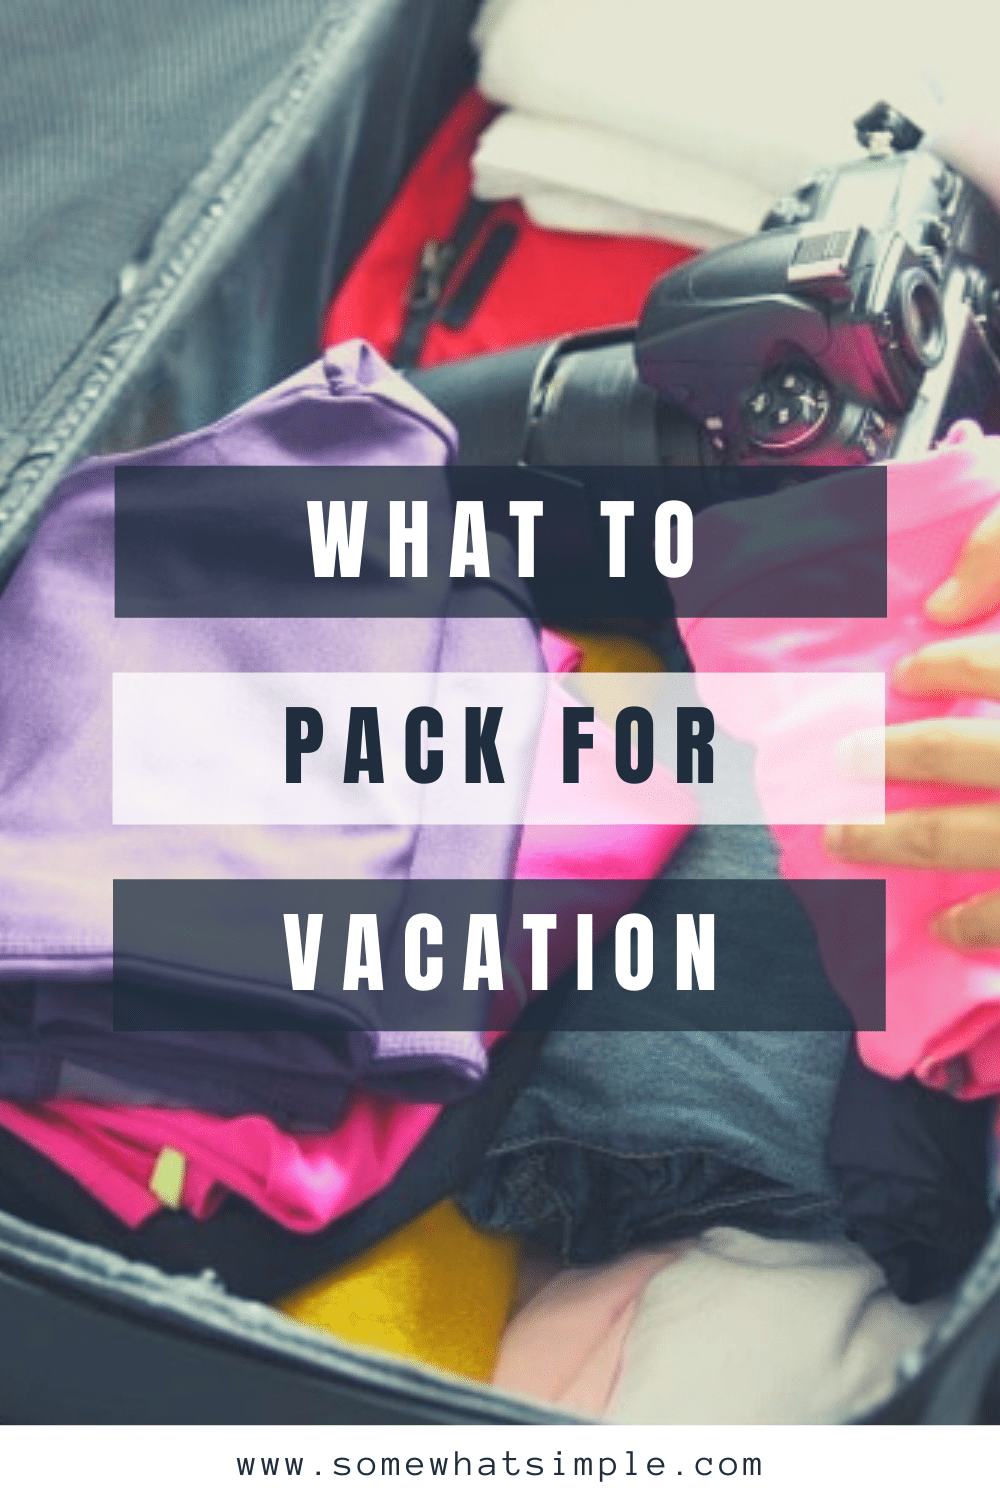 Don't you hat going on vacation only to realize you forgot something? With this list of ideas, you'll never have that problem again. From trash bags to duct tape, a power strip and more! Here is a list of things to pack in your suitcase that could save you some time and sanity on your next vacation! Now you can rest assured that you'll have everything you'll need for your next vacation. via @somewhatsimple